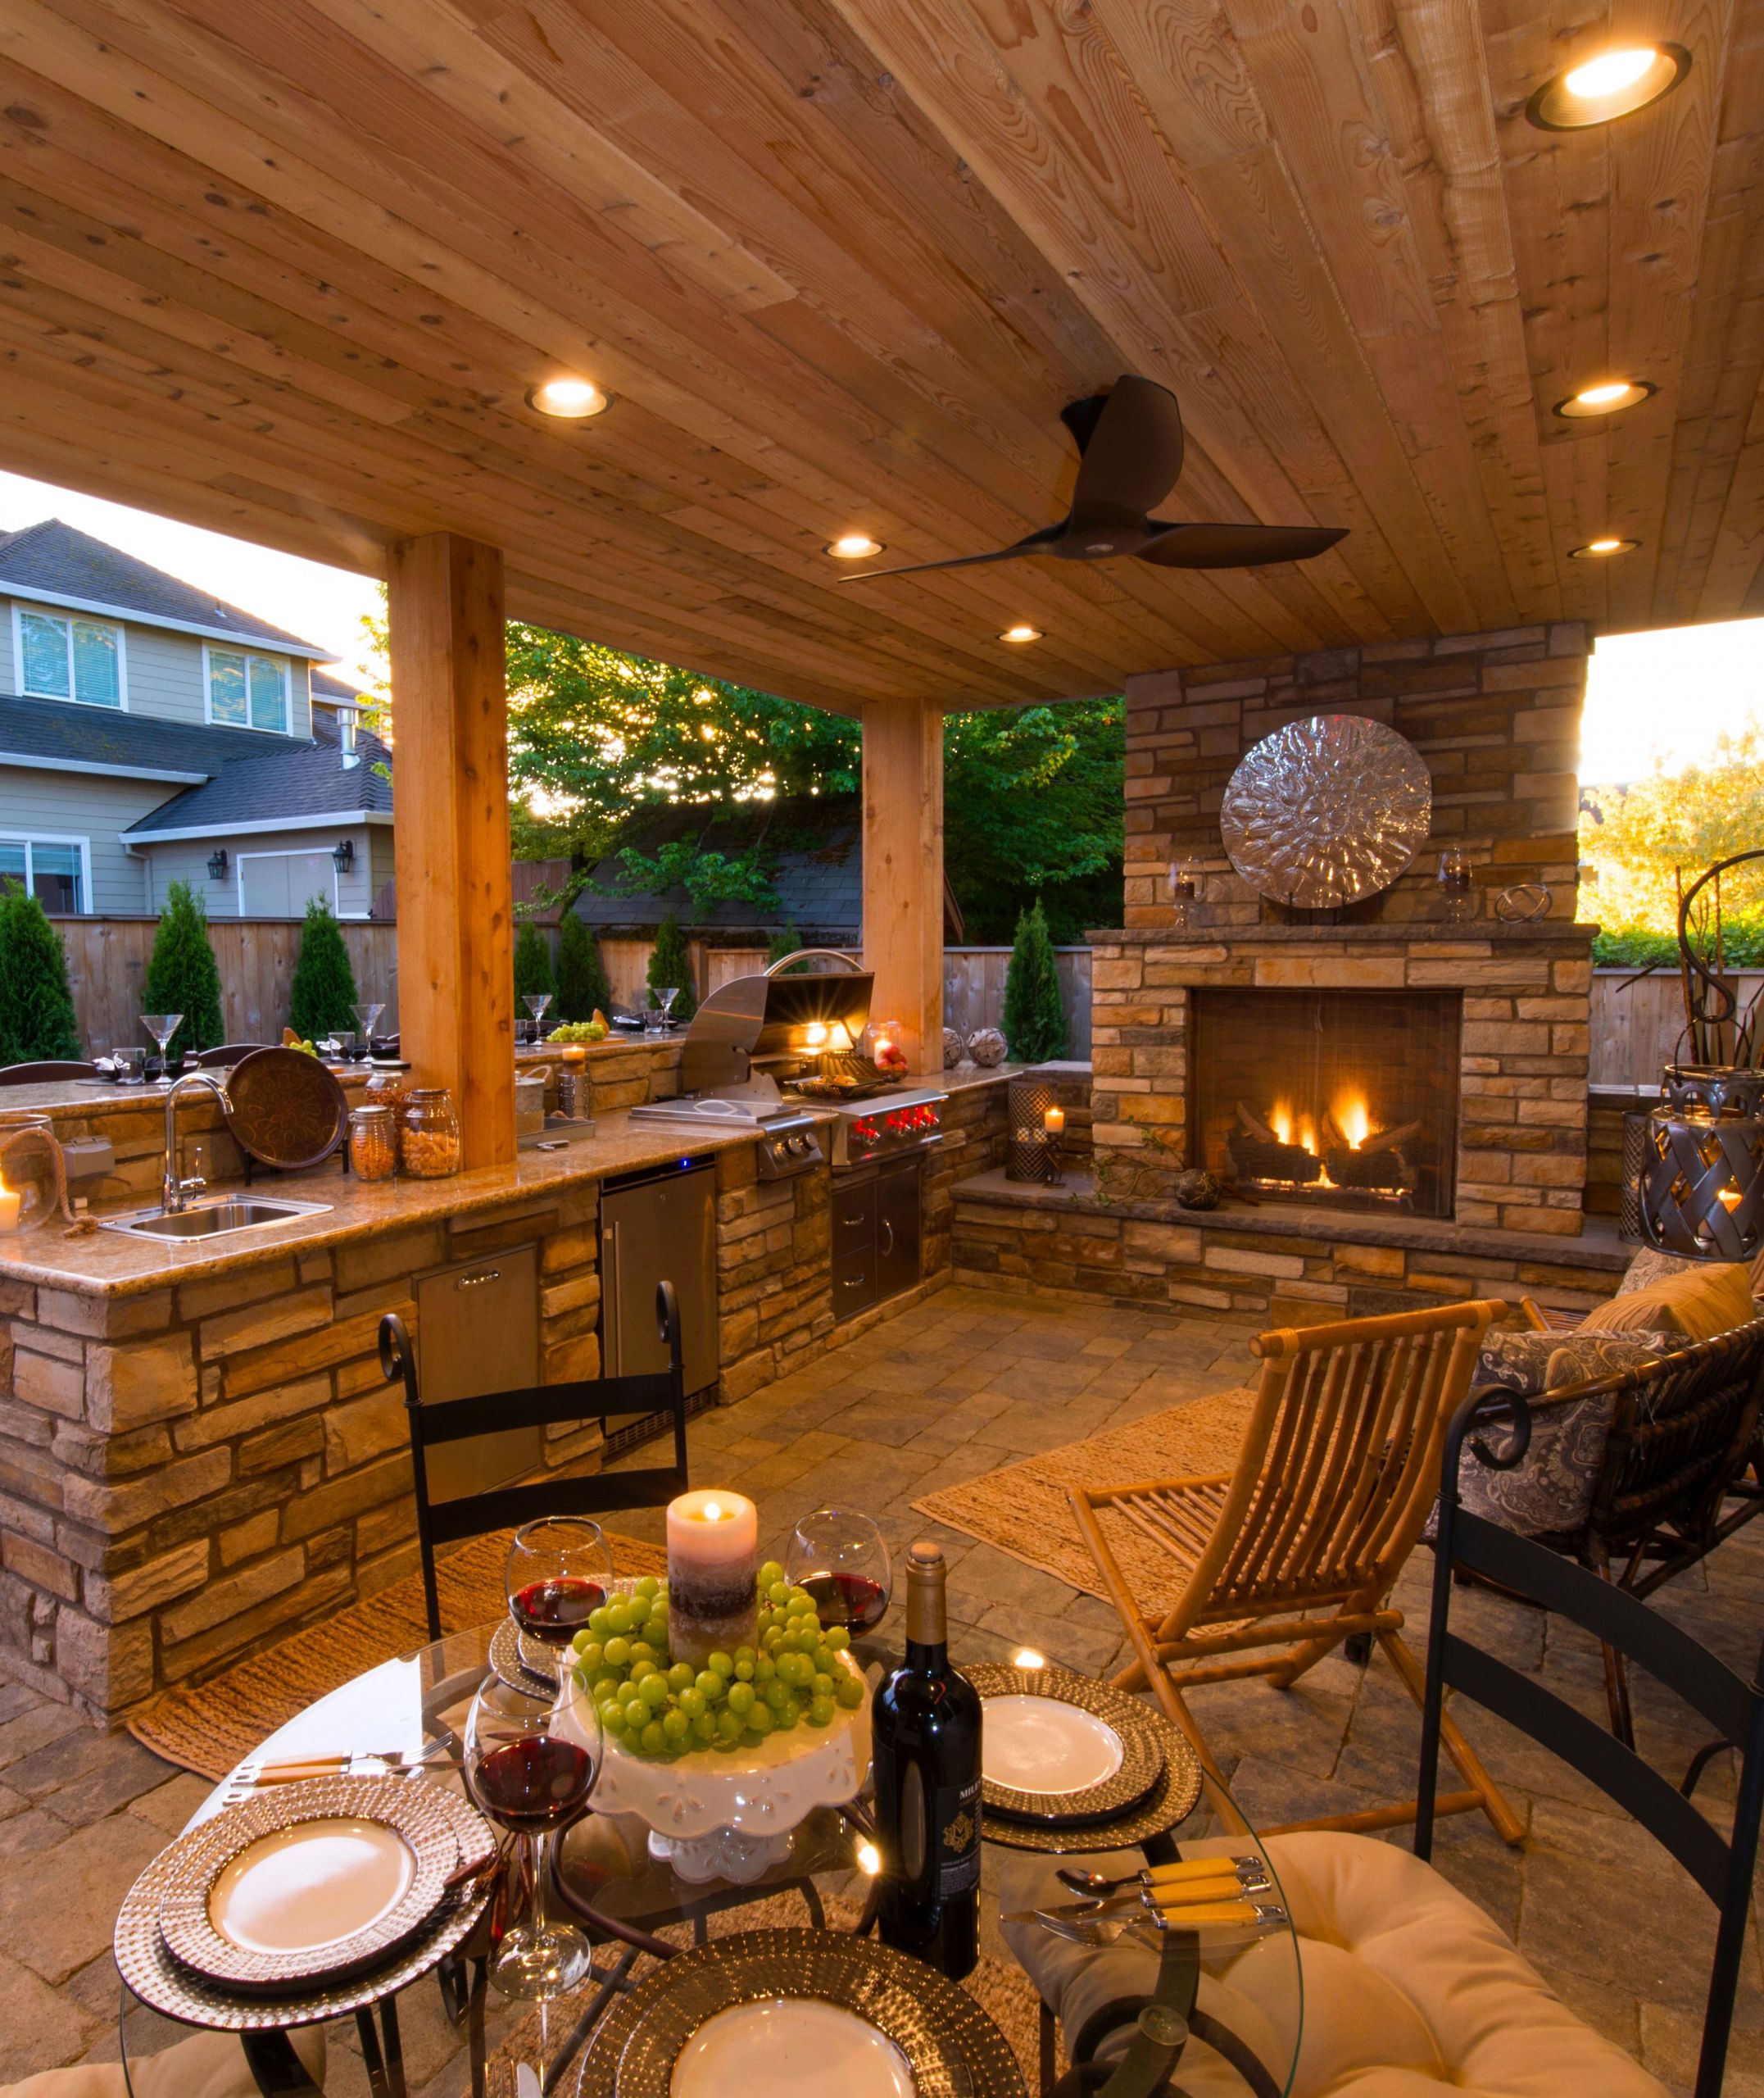 Outdoor Kitchen And Fireplace Ideas
 Pin by Reta Mcrae on OUTDOOR SPACES